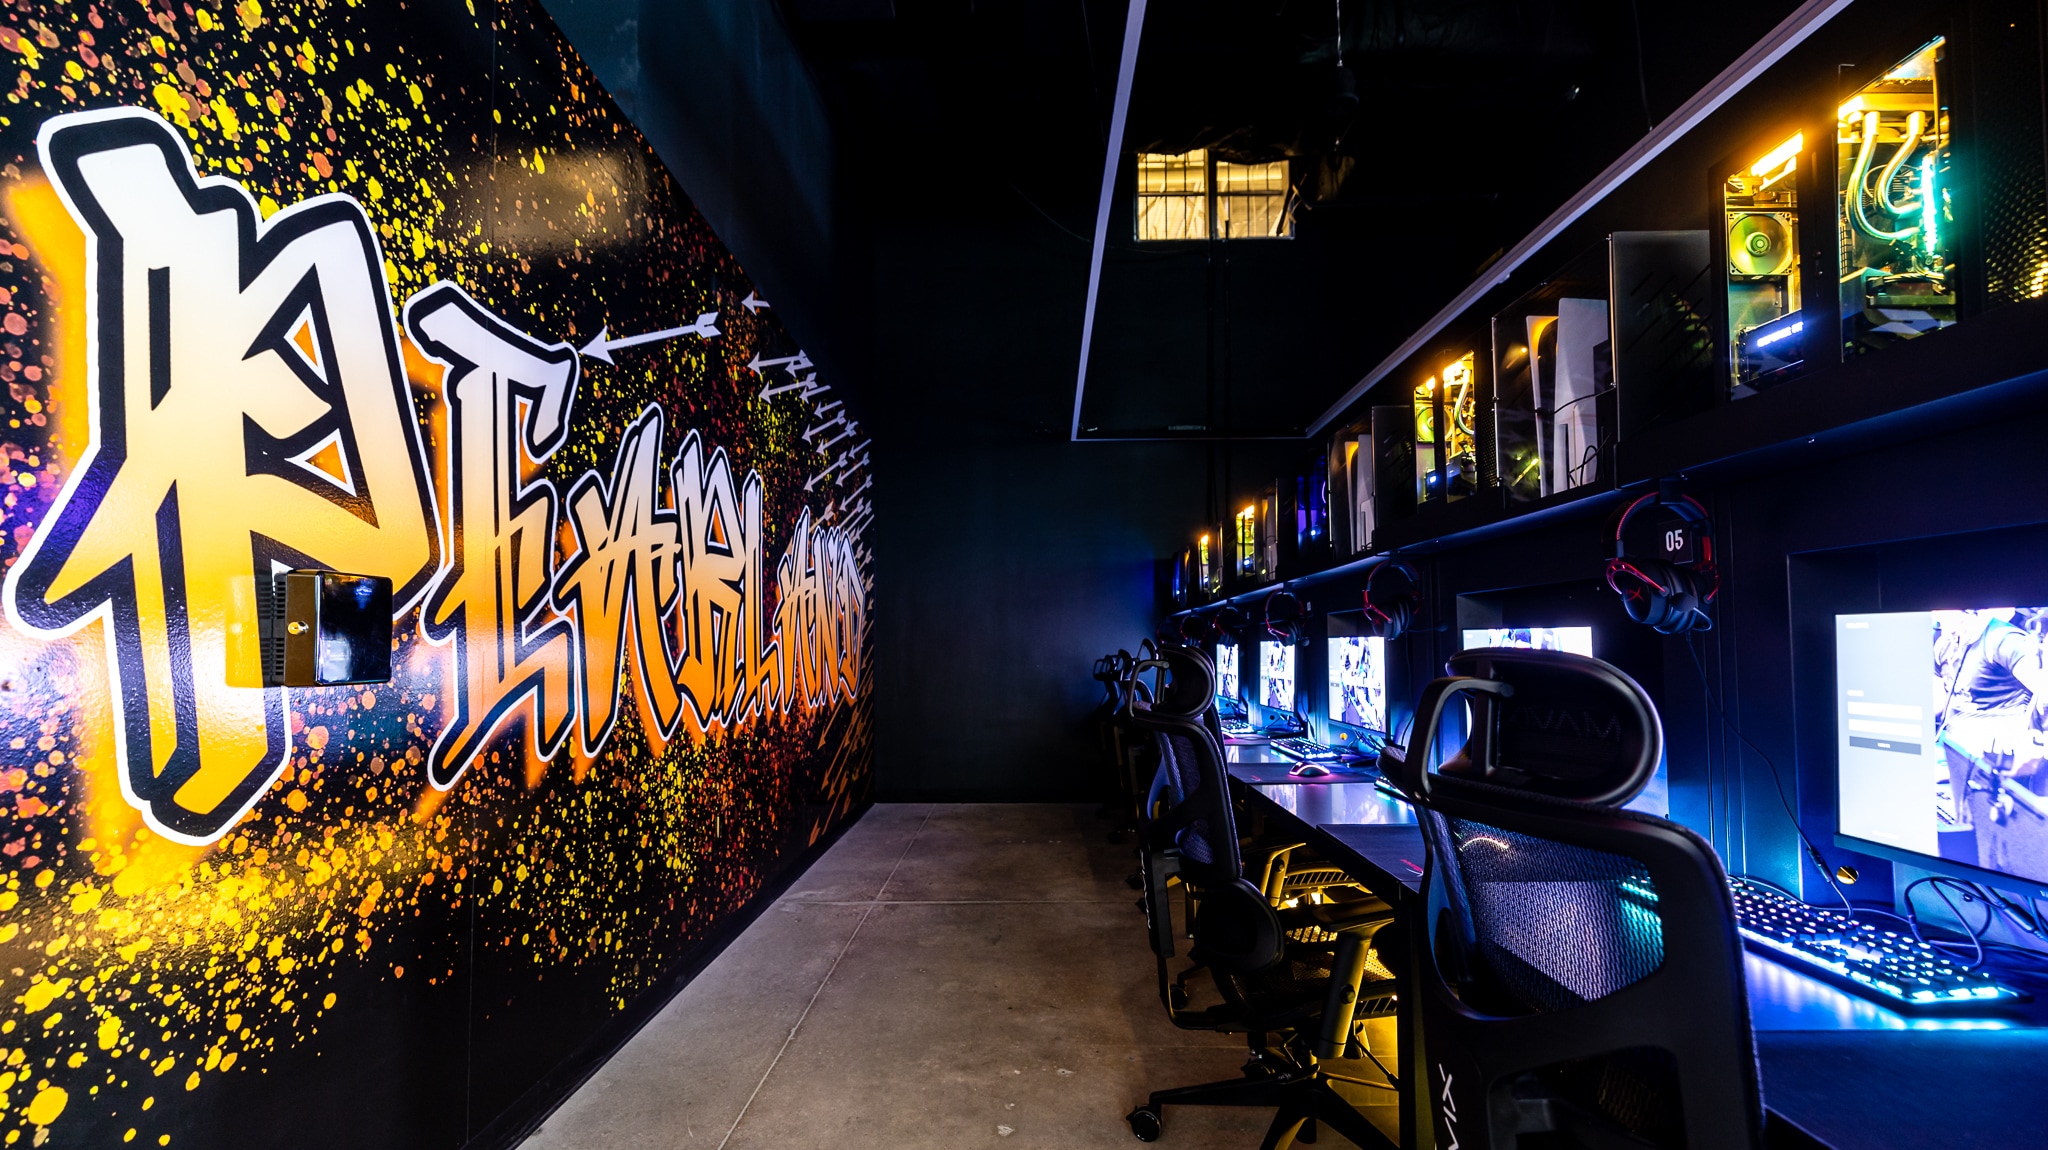 Belong Gaming Arena is Franklin's new home for esports and gaming